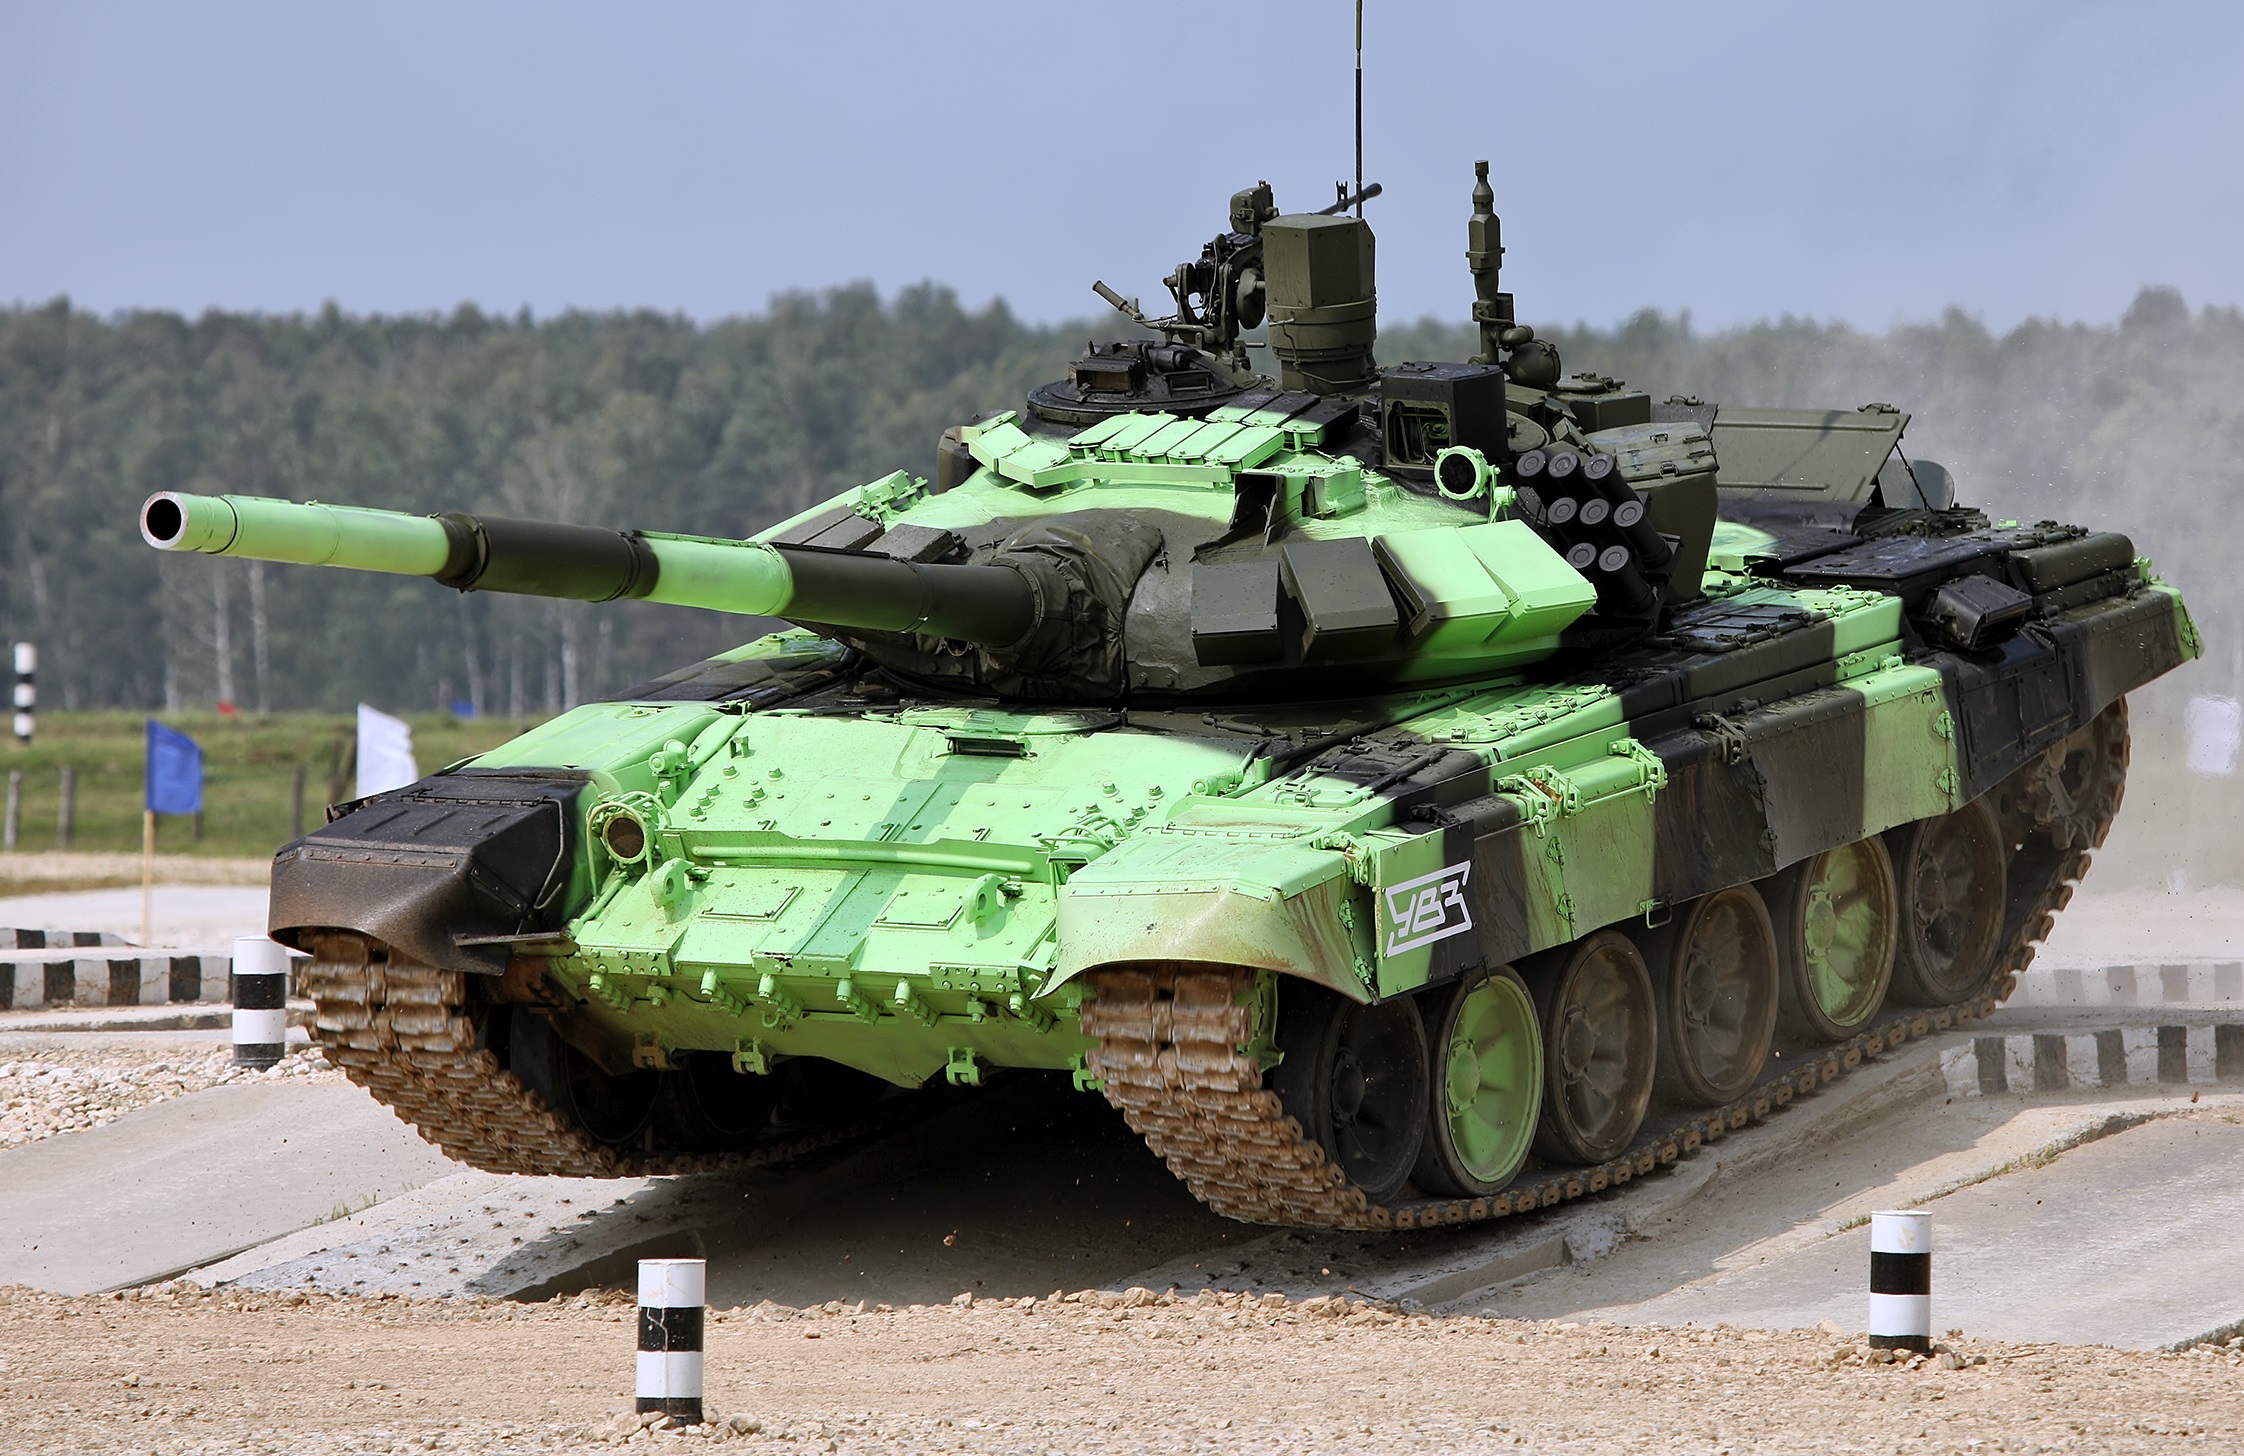 what does it cost for tanks for the military